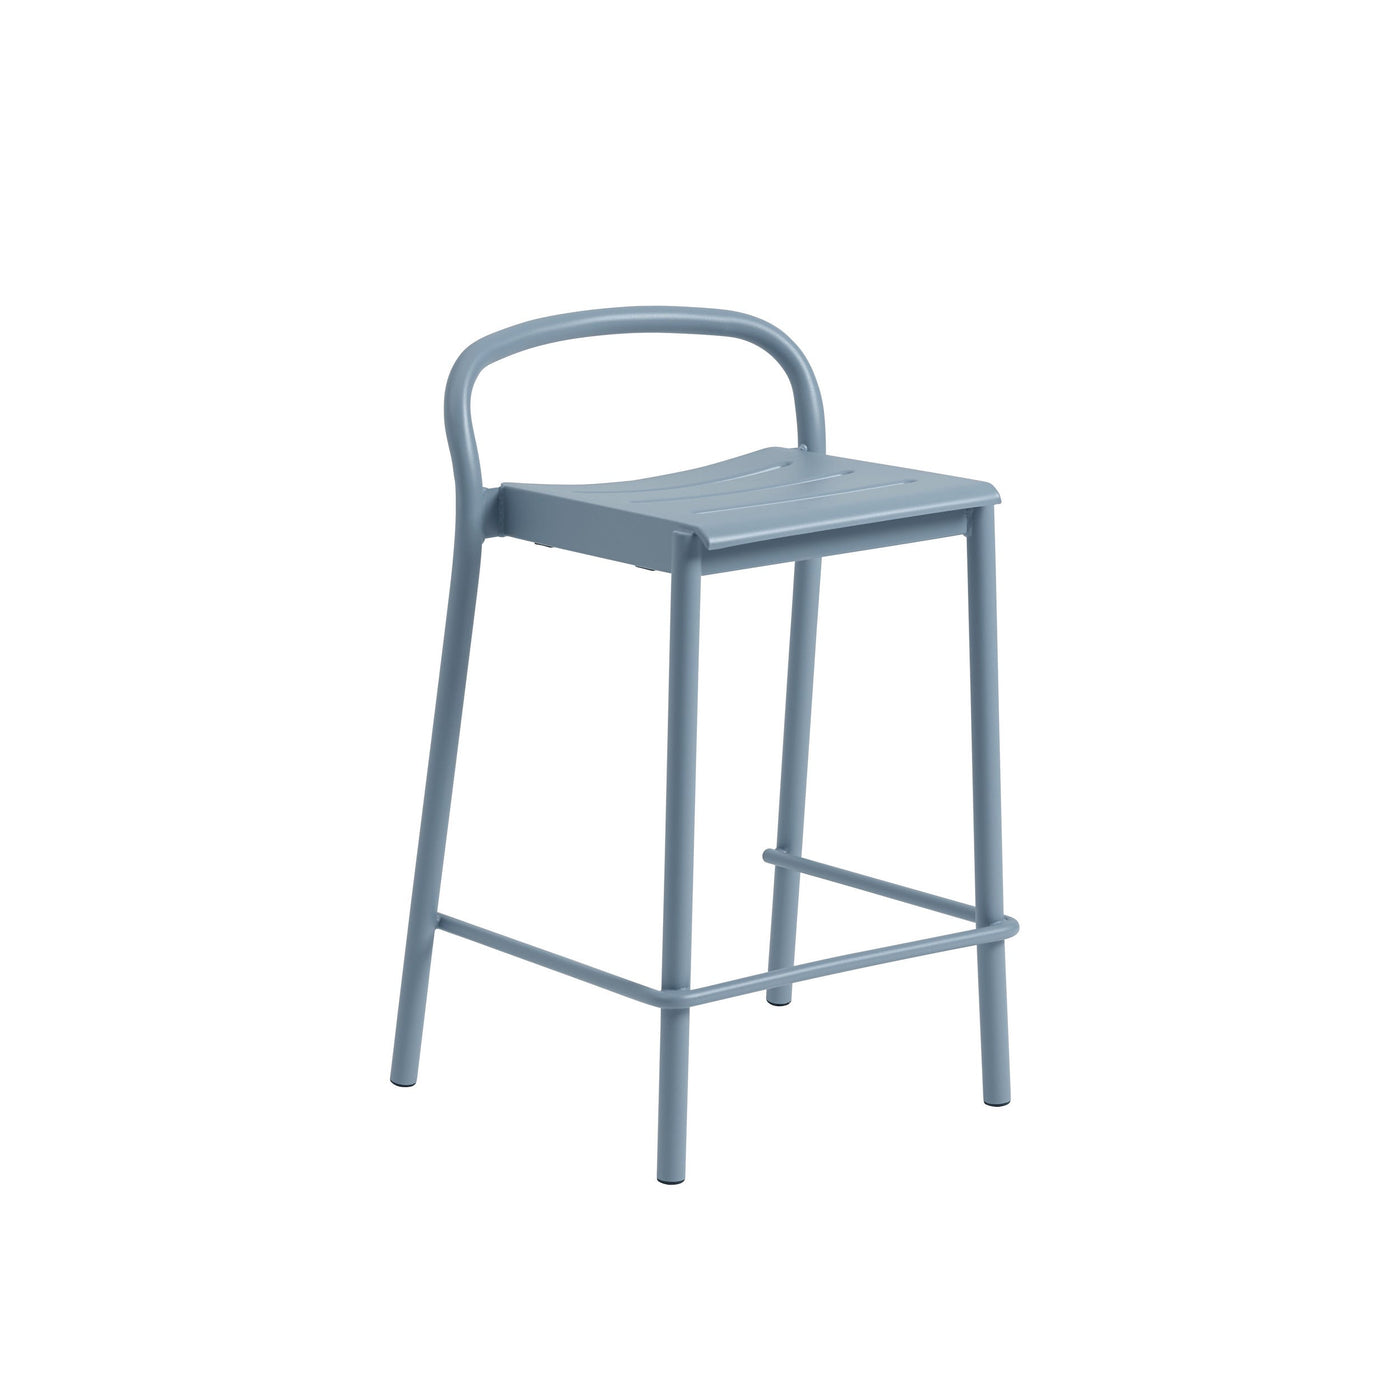 Muuto Linear Steel Counter Stool. Shop outdoor furniture at someday designs. #colour_pale-blue